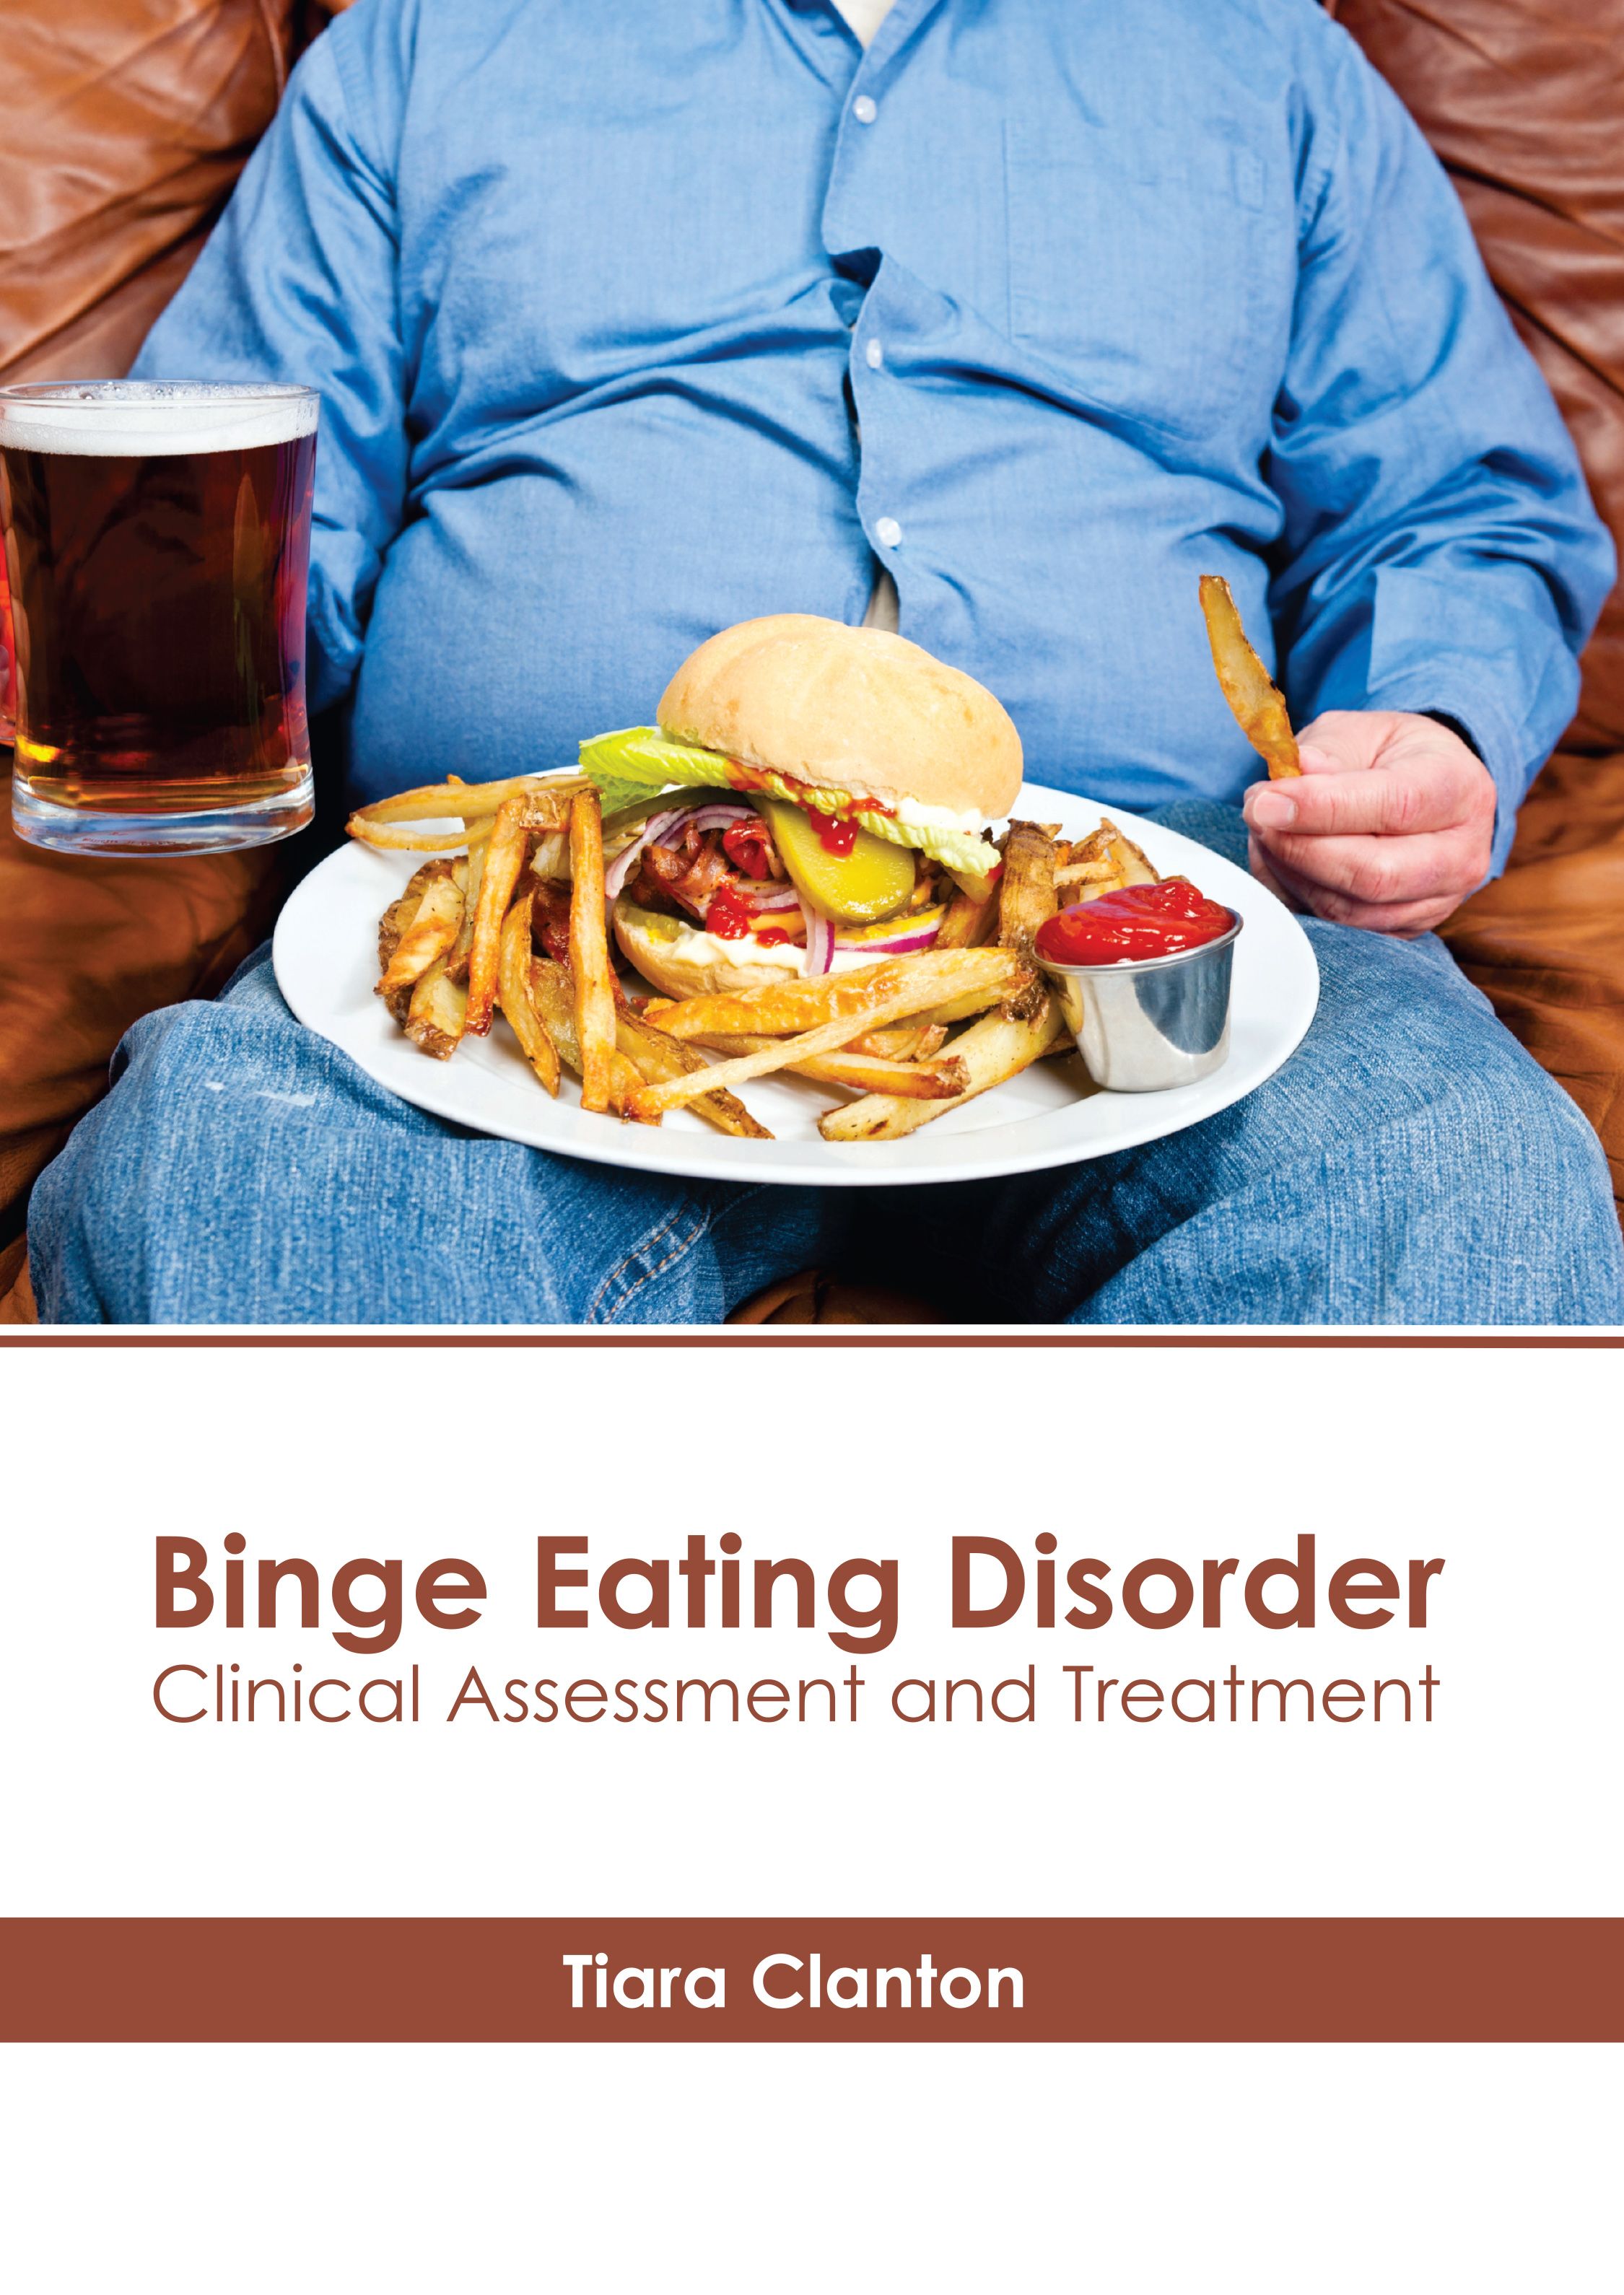 BINGE EATING DISORDER: CLINICAL ASSESSMENT AND TREATMENT